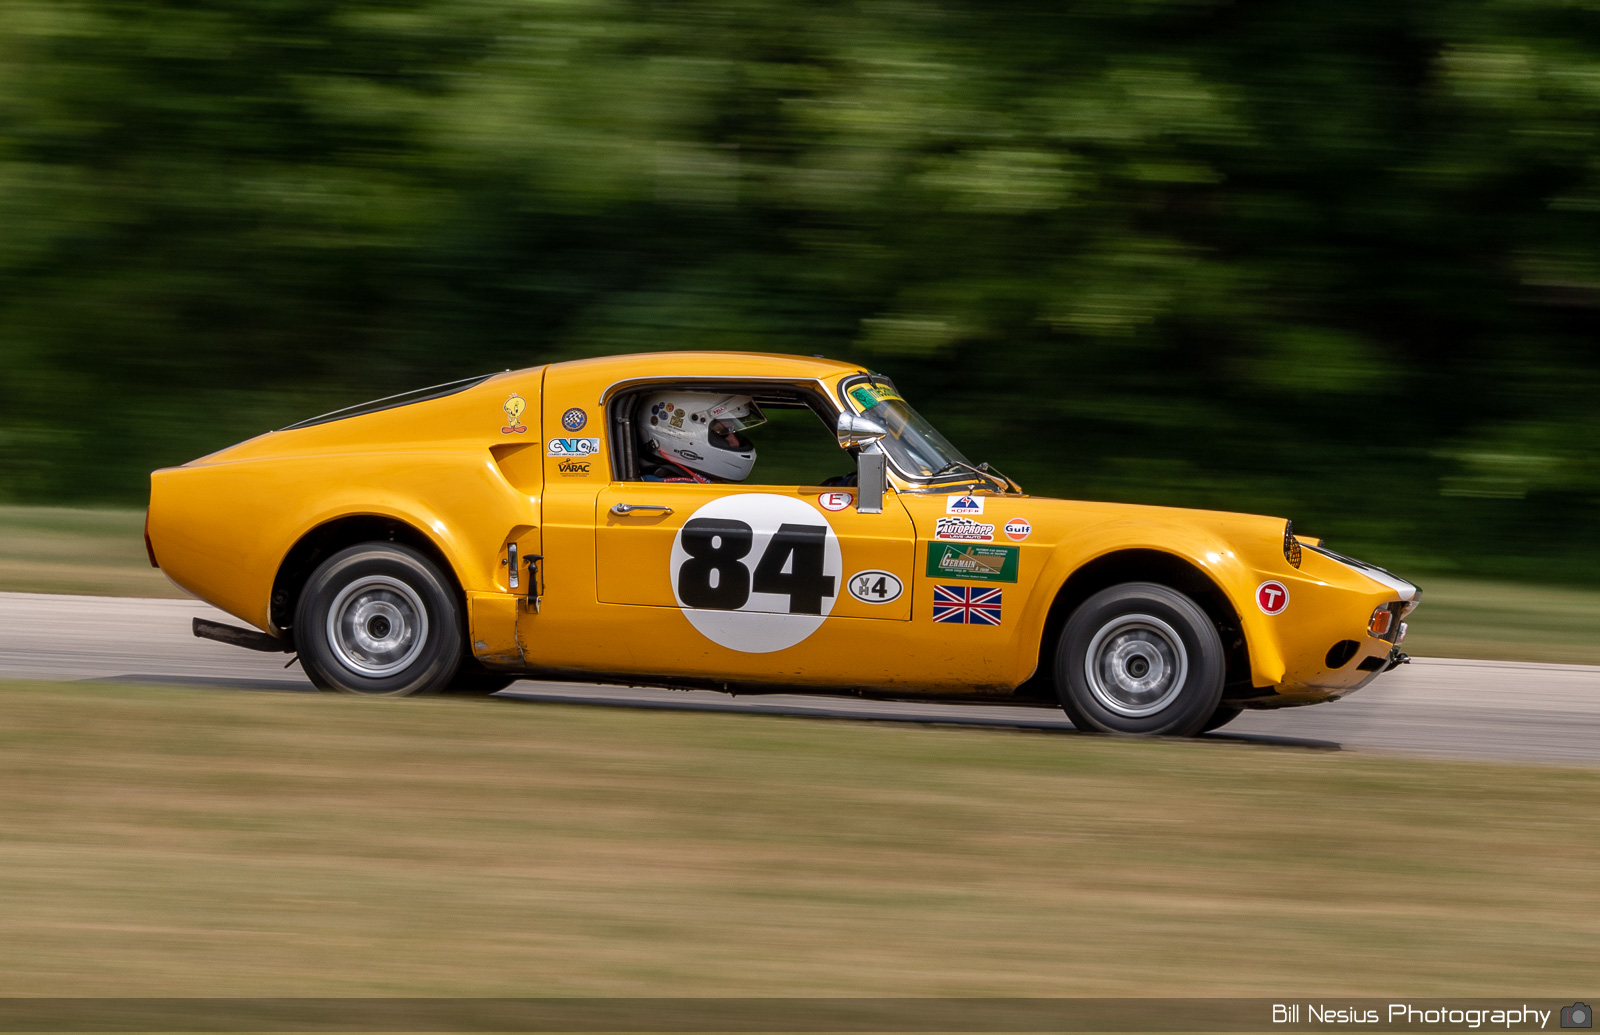 Racing Season Favorites from Blackhawk Farms and Road America Vintage events in 2020.